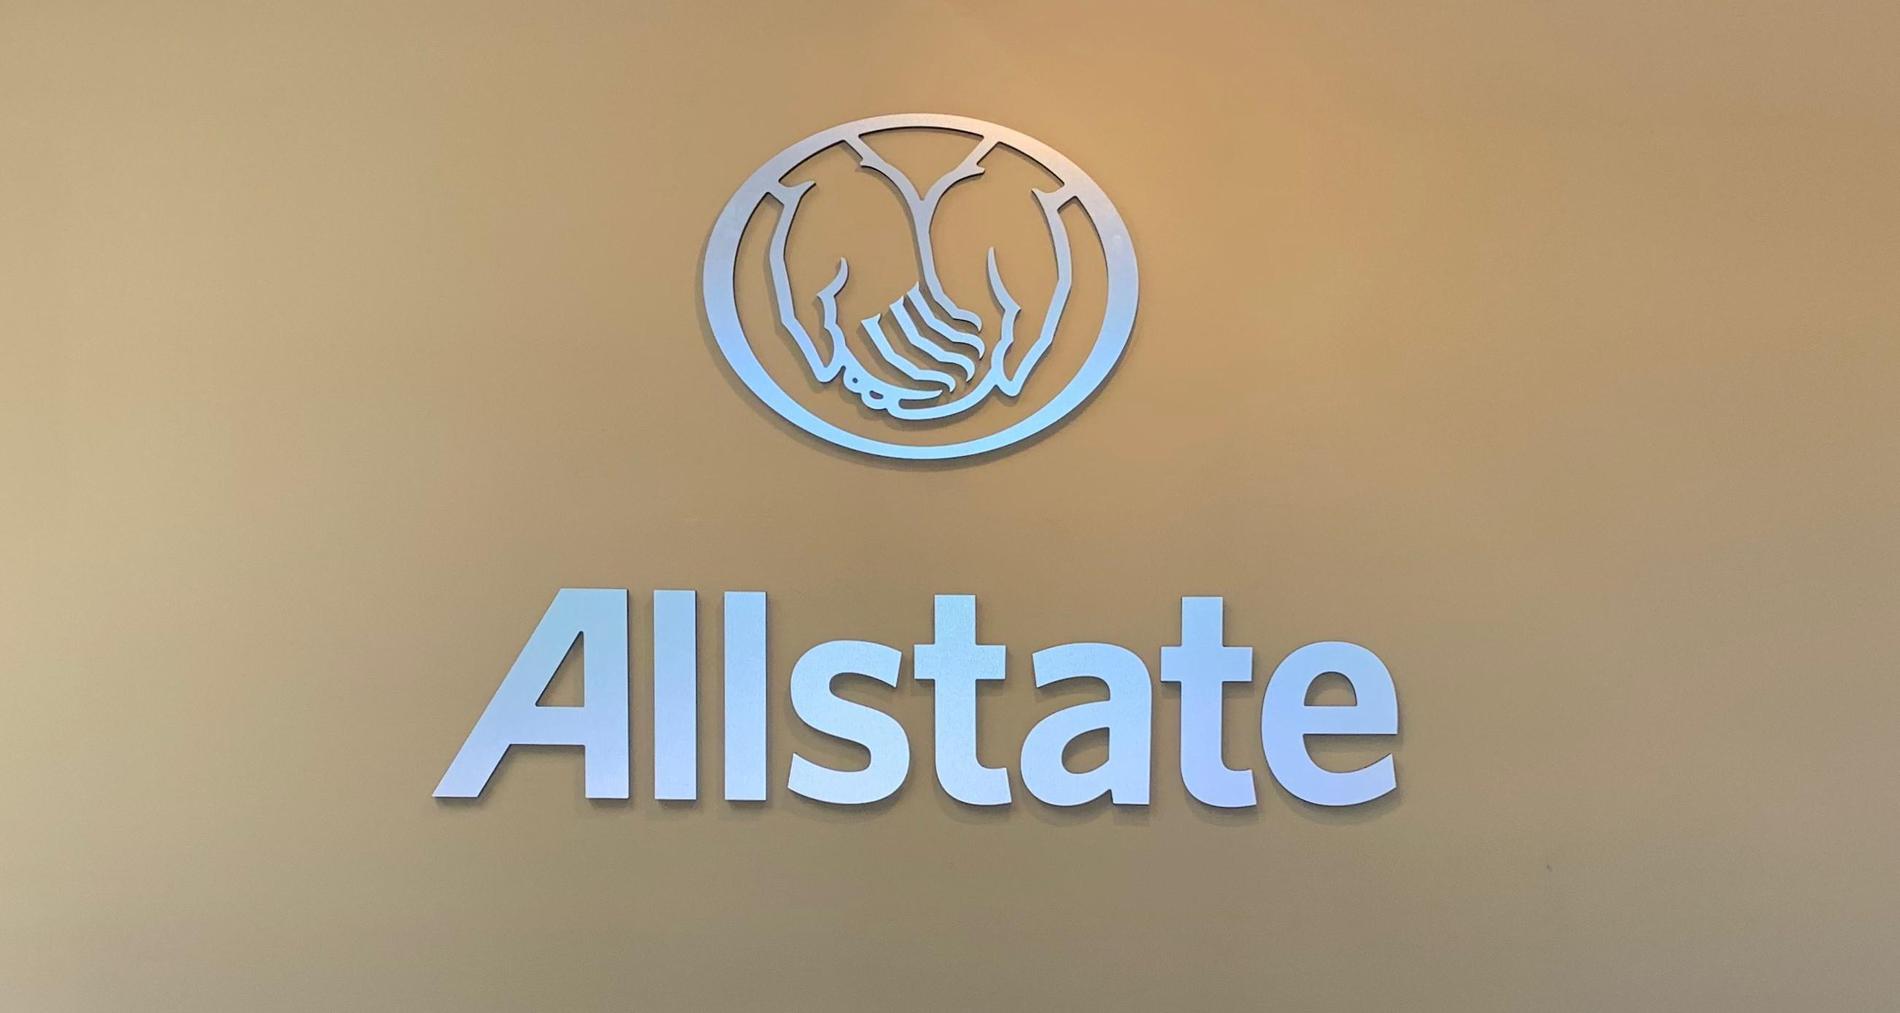 Images Mulcare Insurance Agency: Allstate Insurance